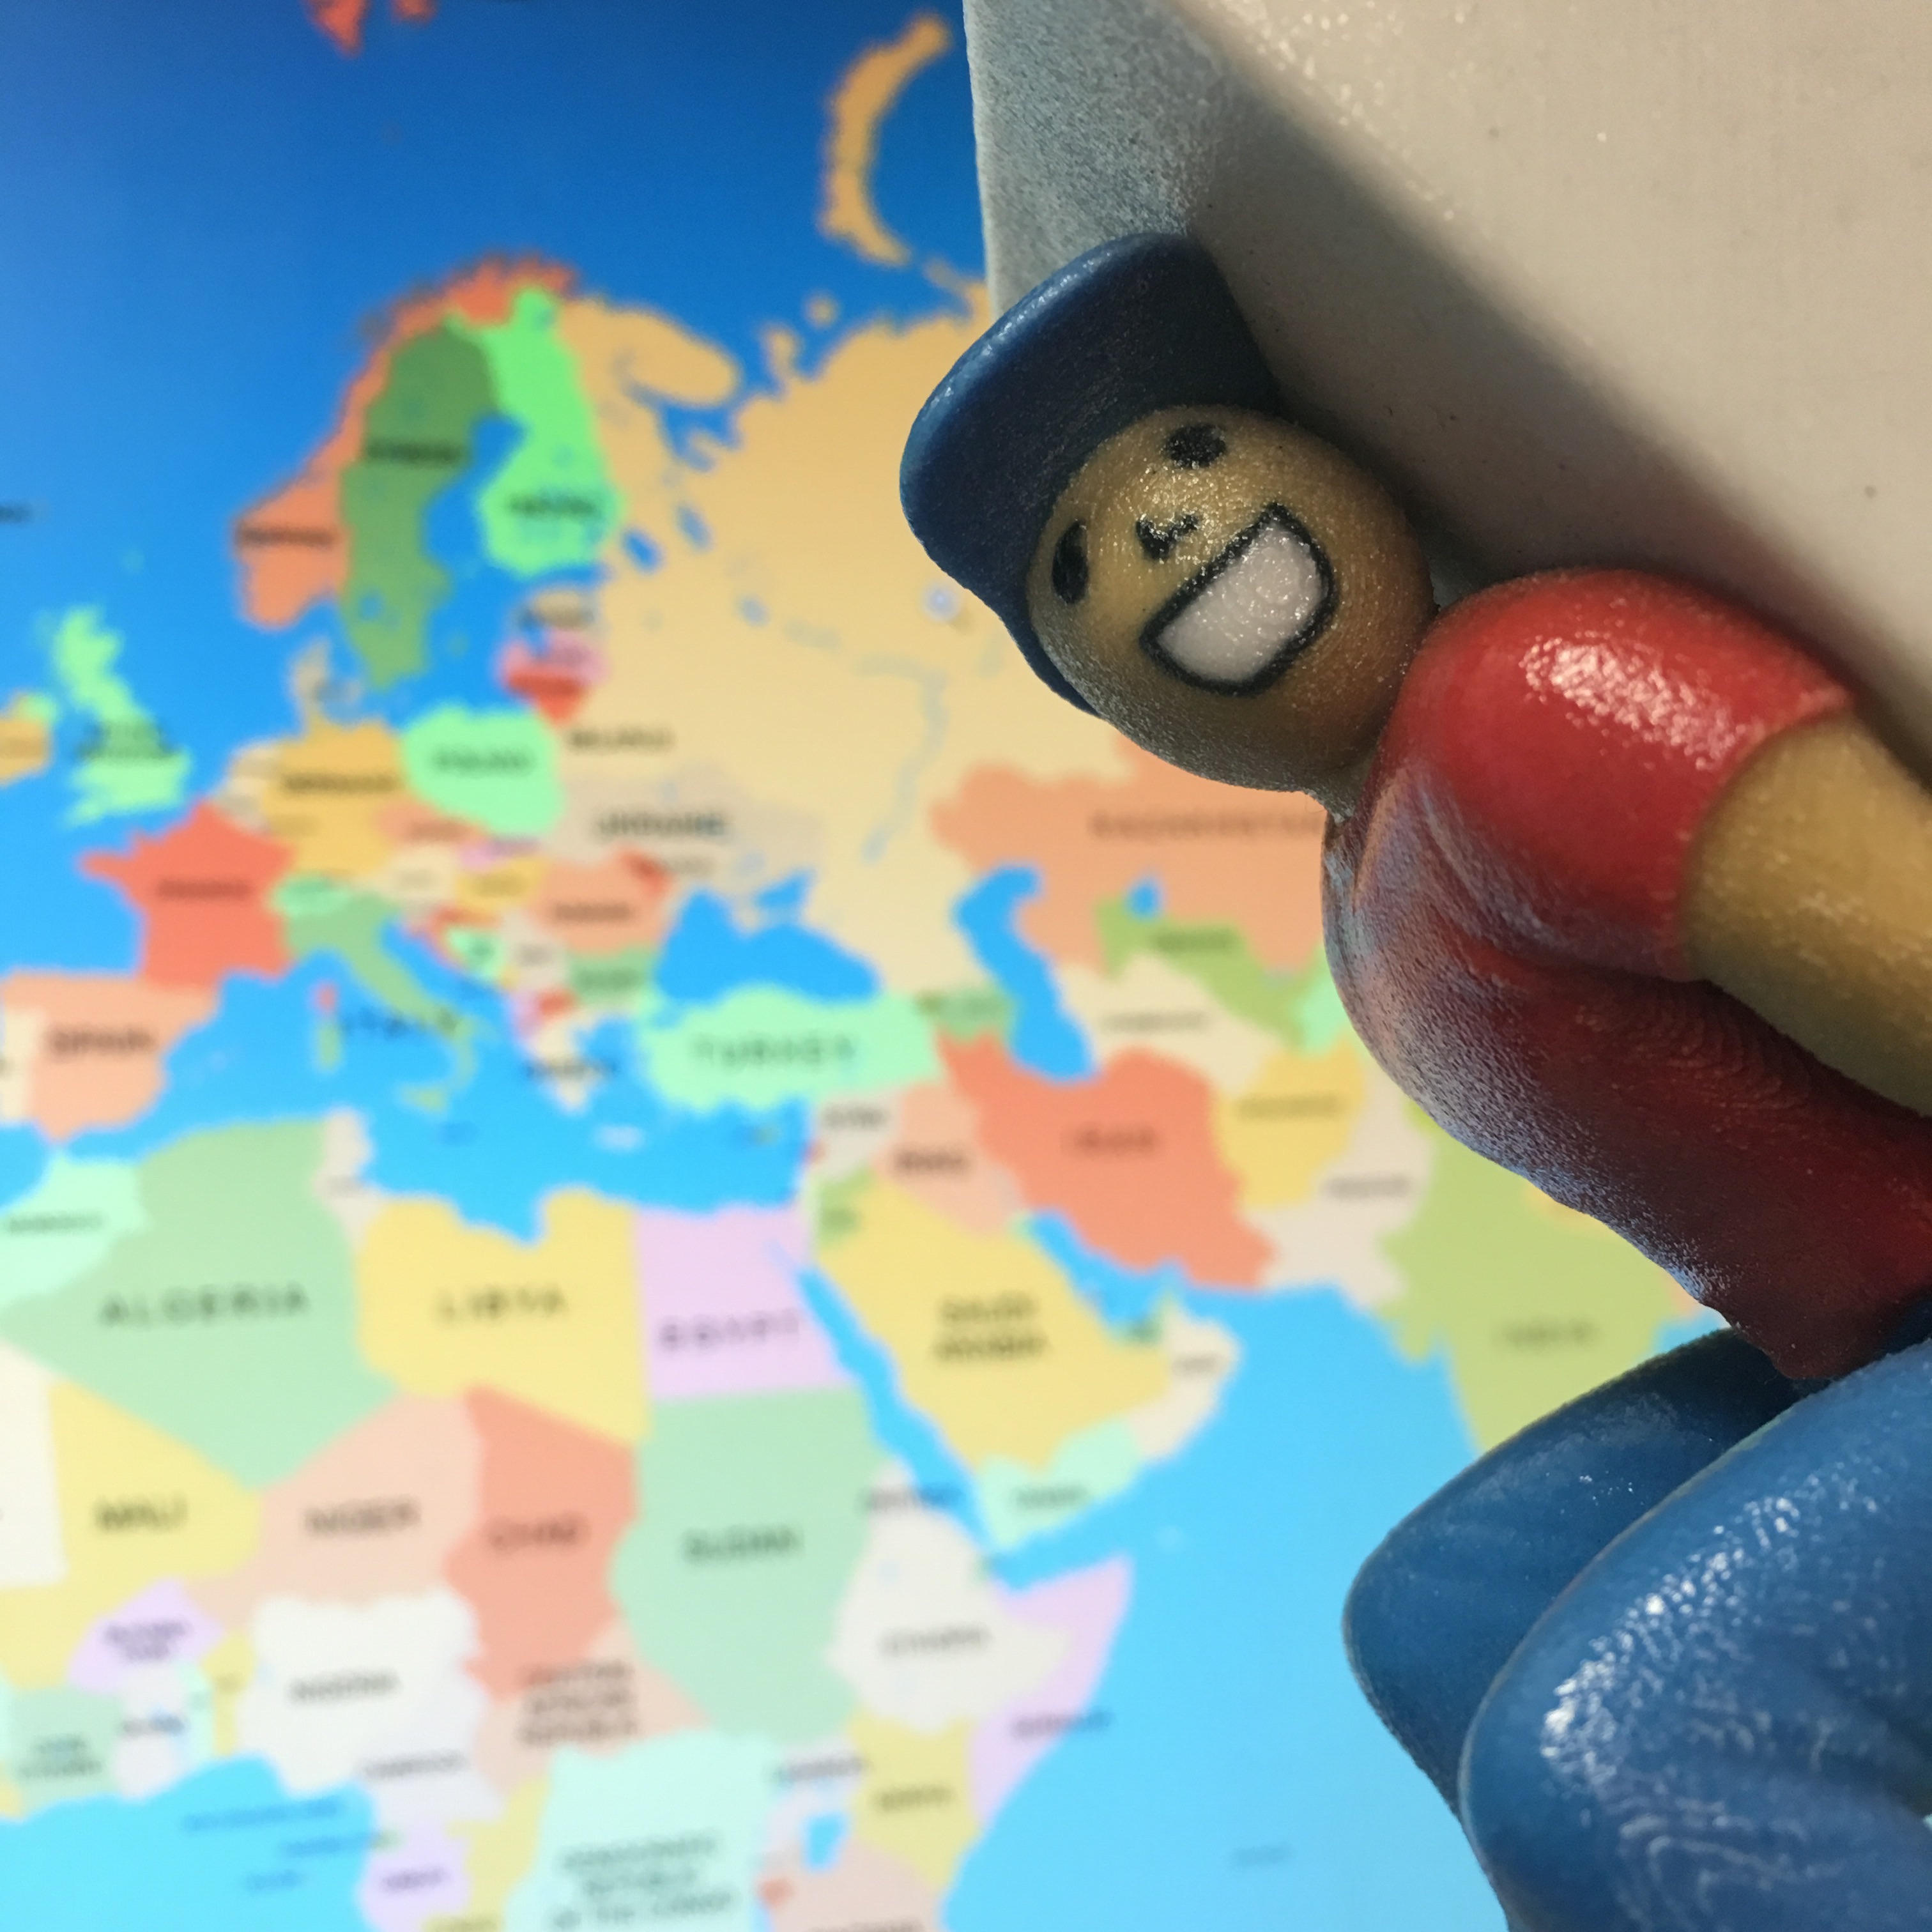 Little Guys Mover Mike contemplates his upcoming trip around the world!